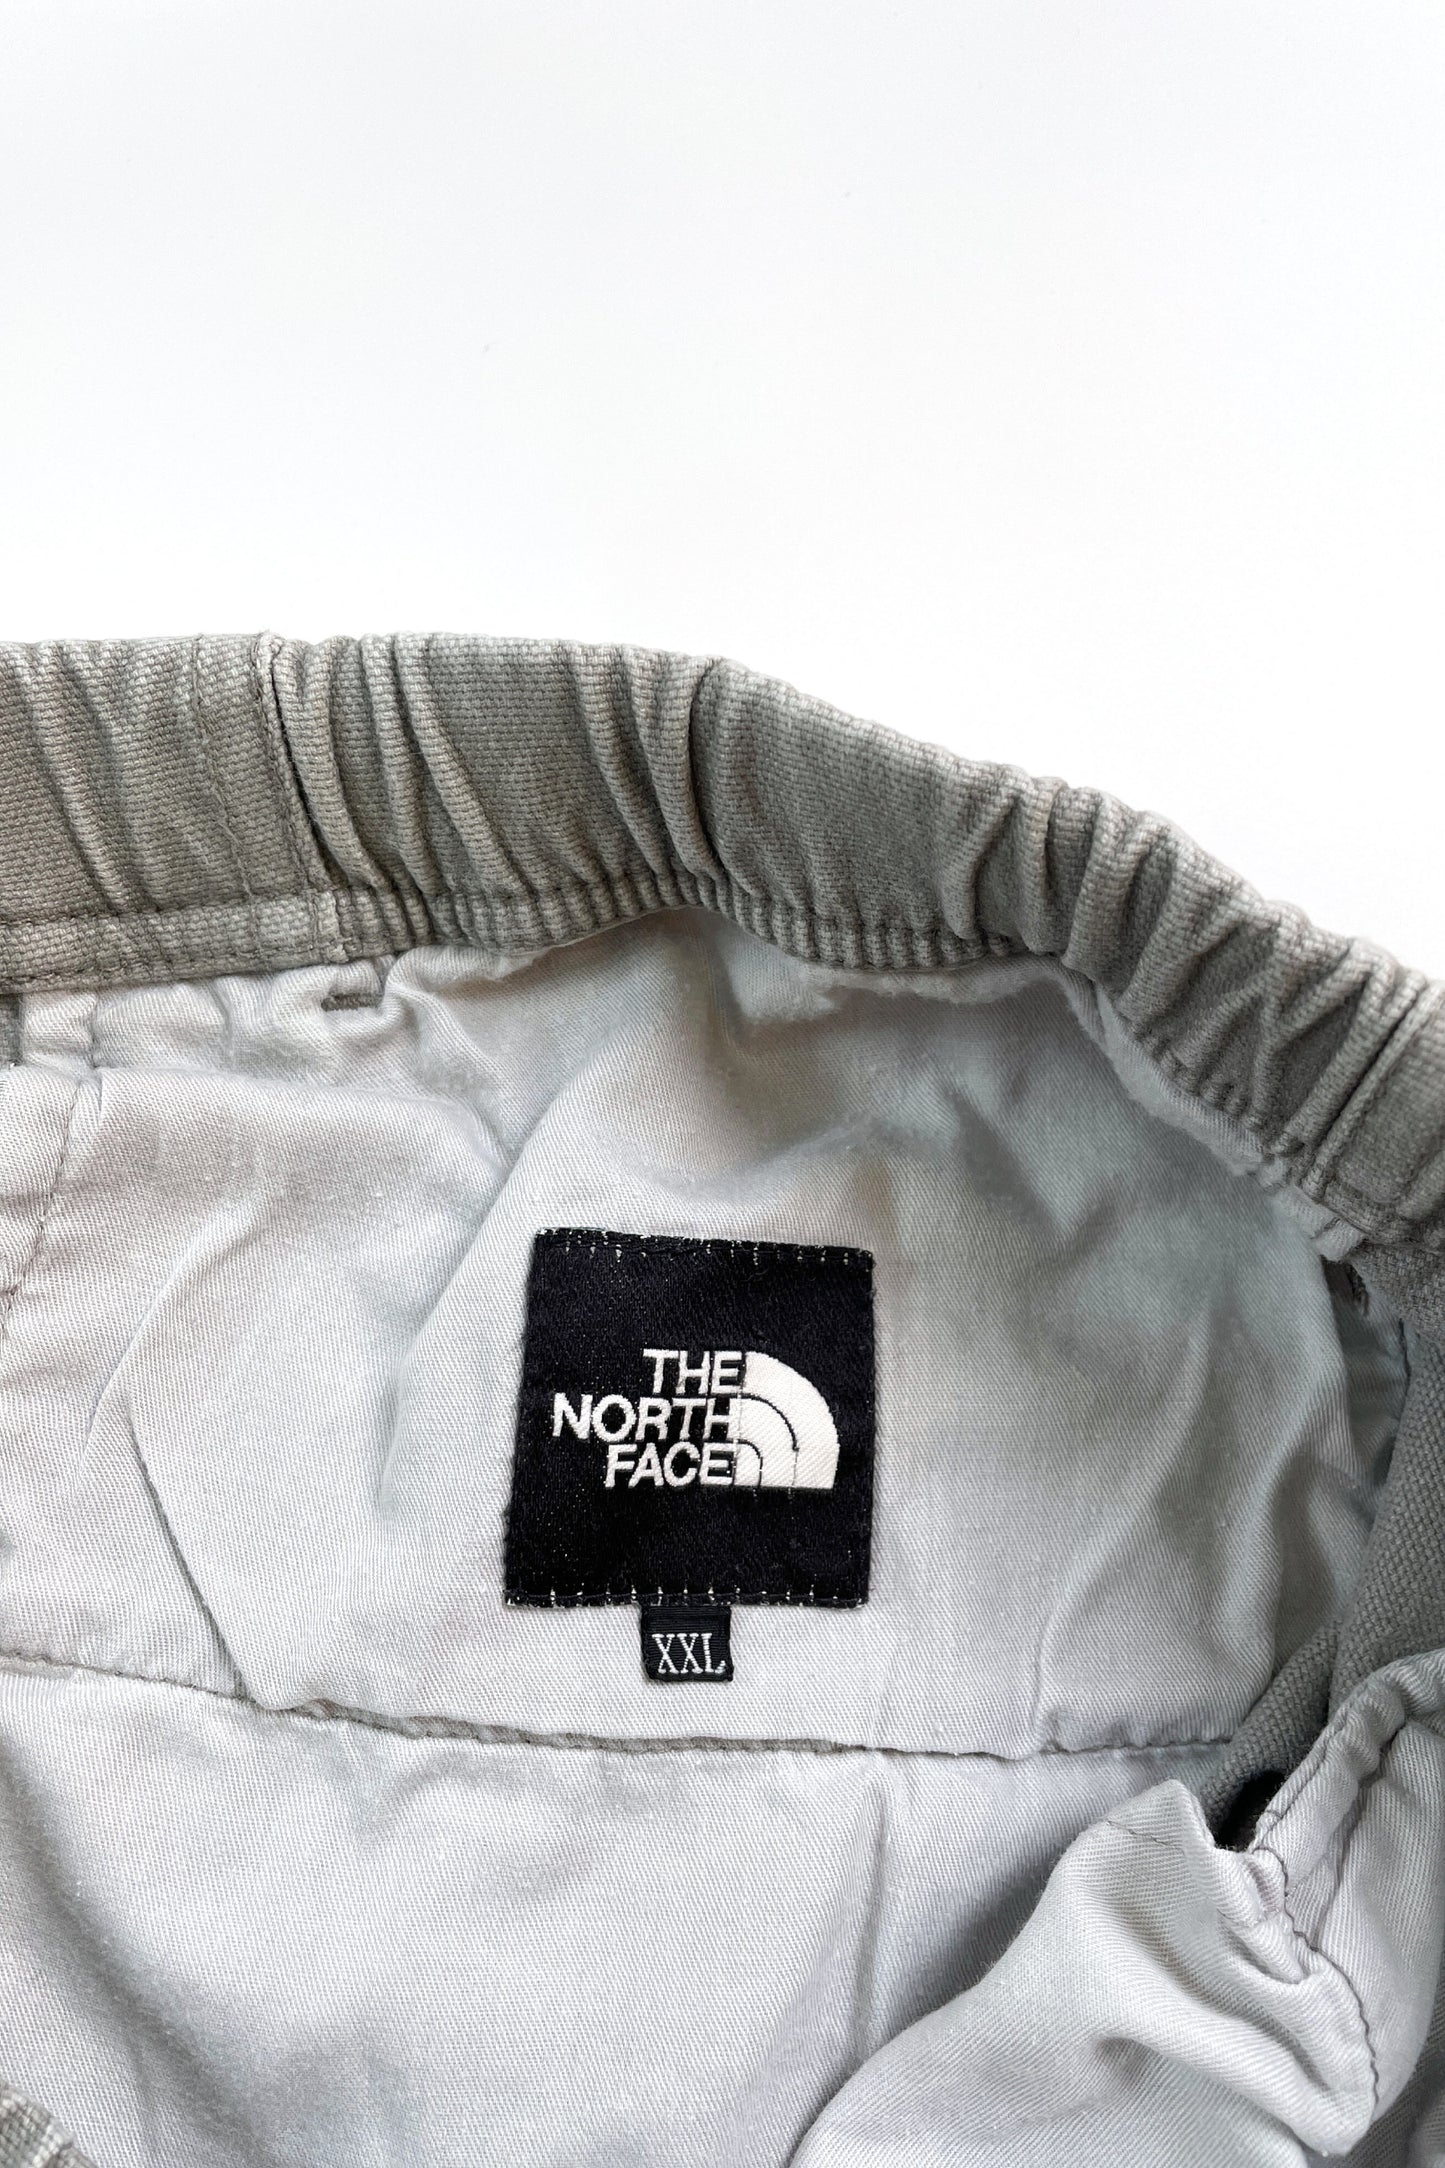 90's THE NORTH FACE climbing pants